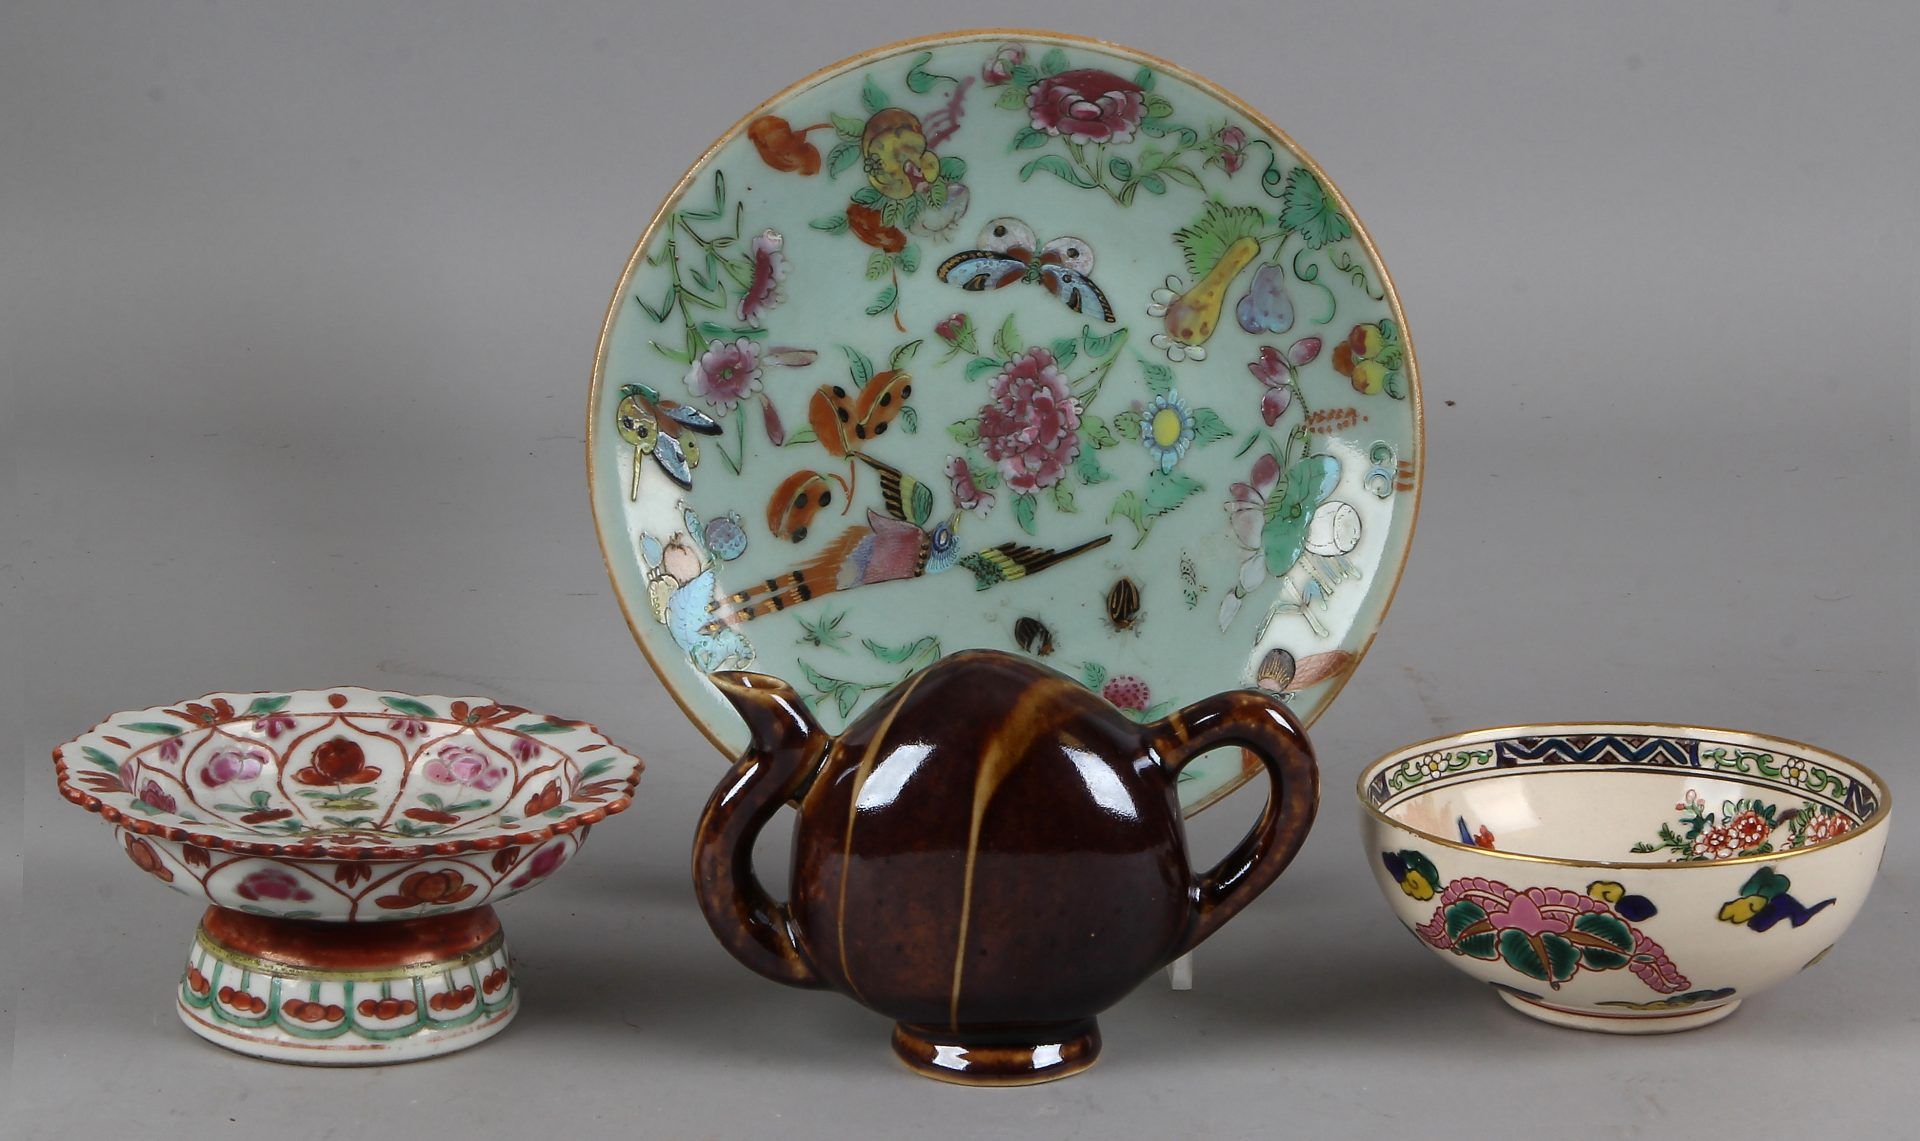 Four pieces of Chinese porcelain 2nd half of 20th century, pouring jug, plate, plate with green